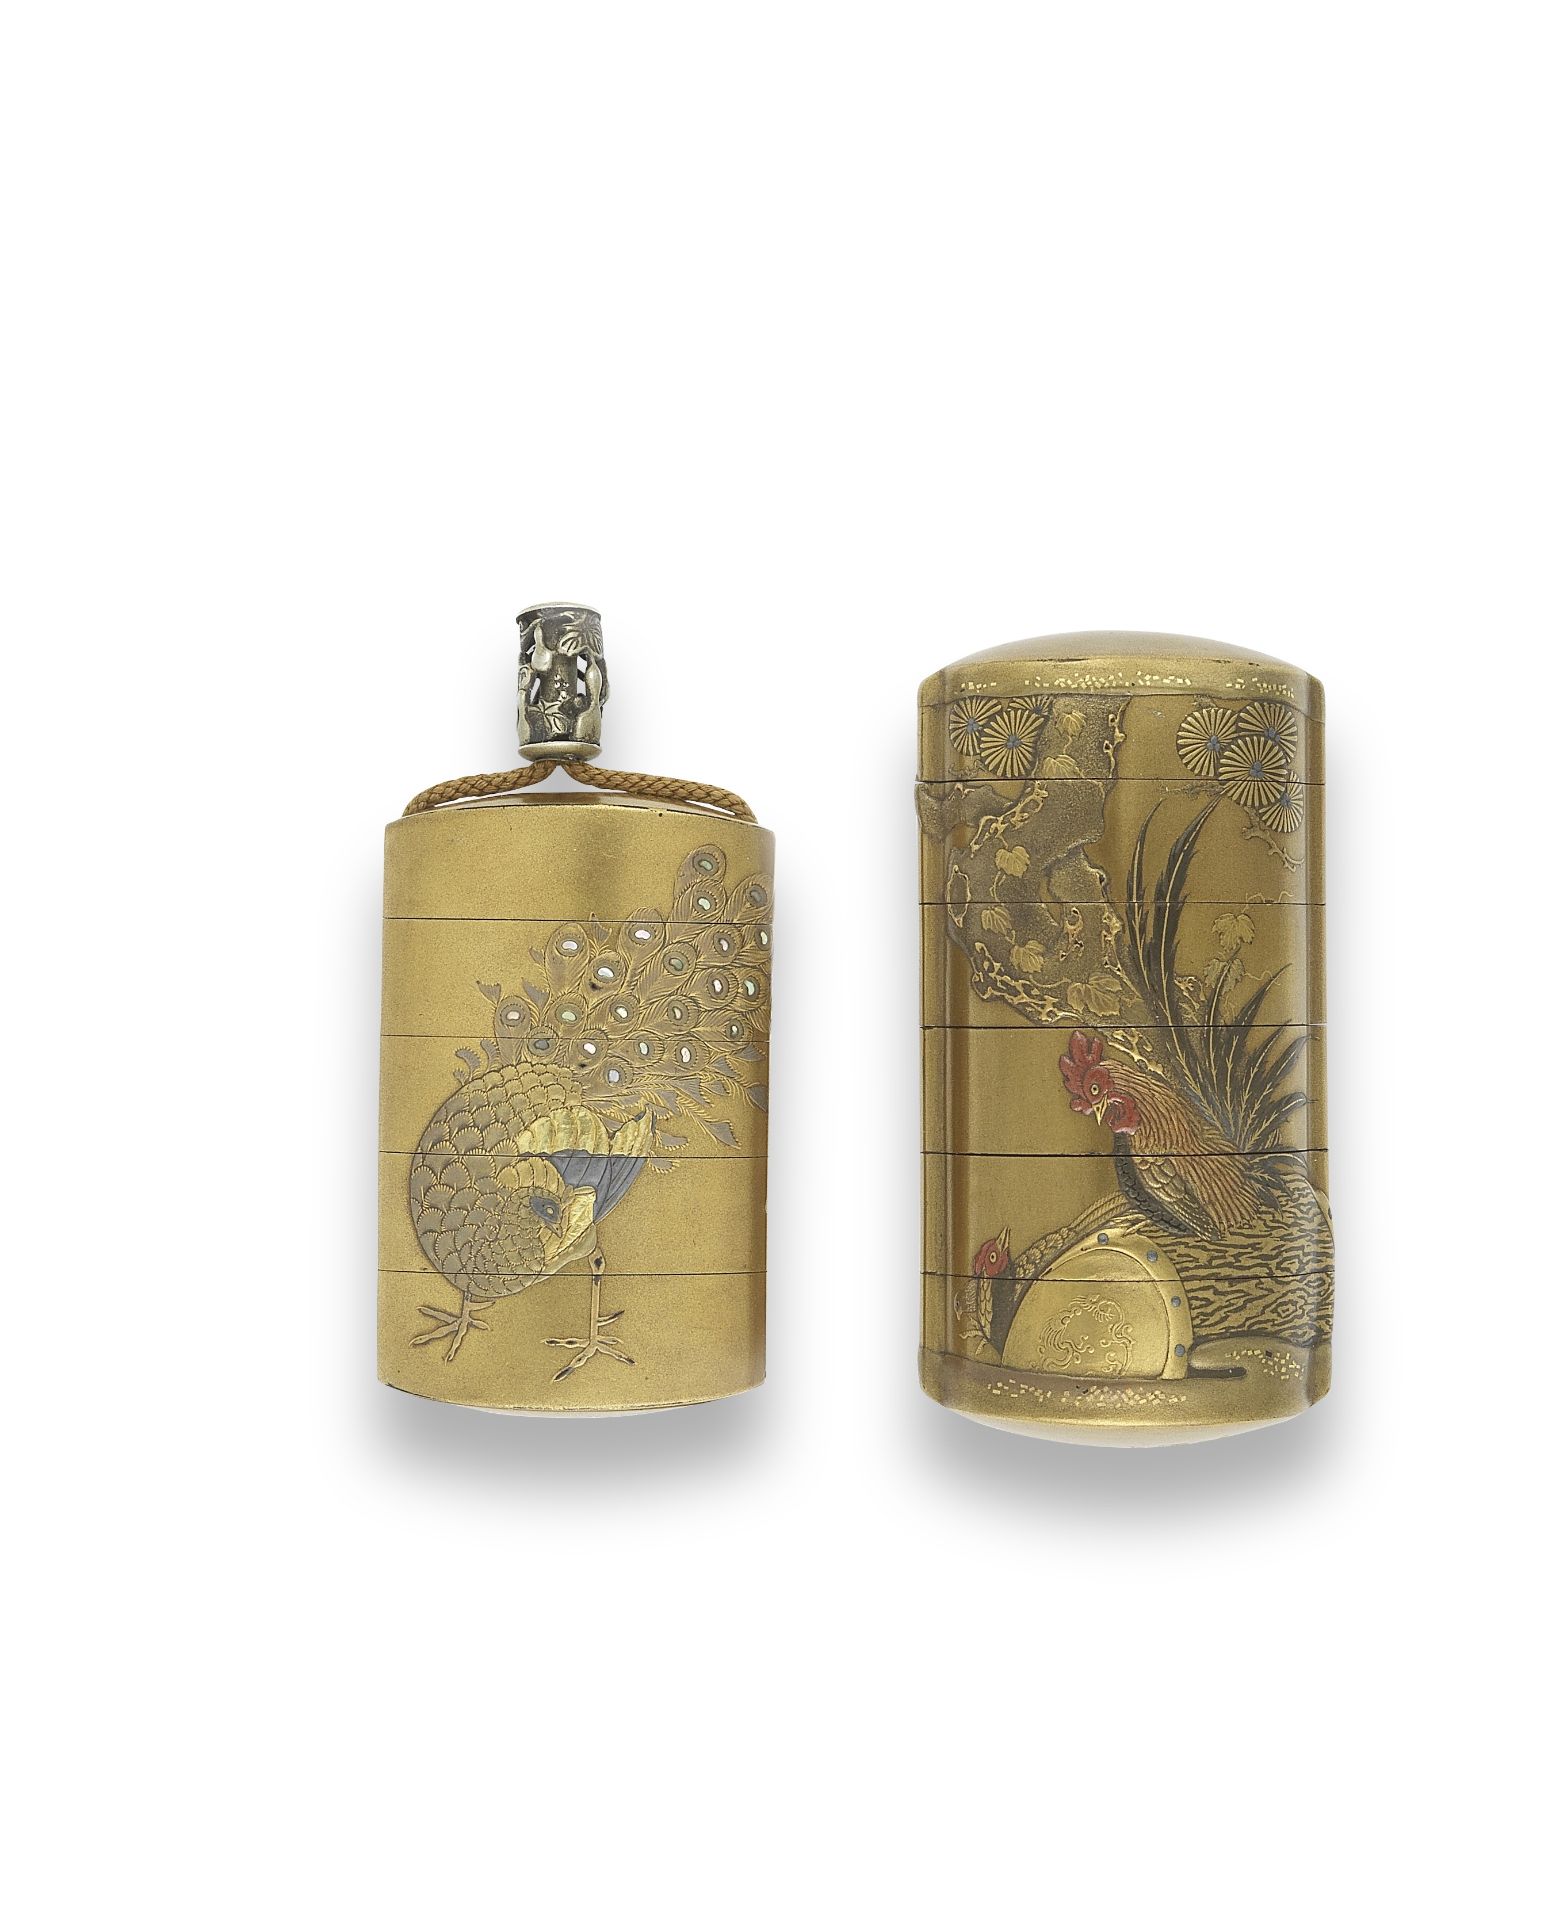 TWO GOLD-LACQUER INRO One by Josen(sai) and one by Hasensai, Edo period (1615-1868), 19th century...